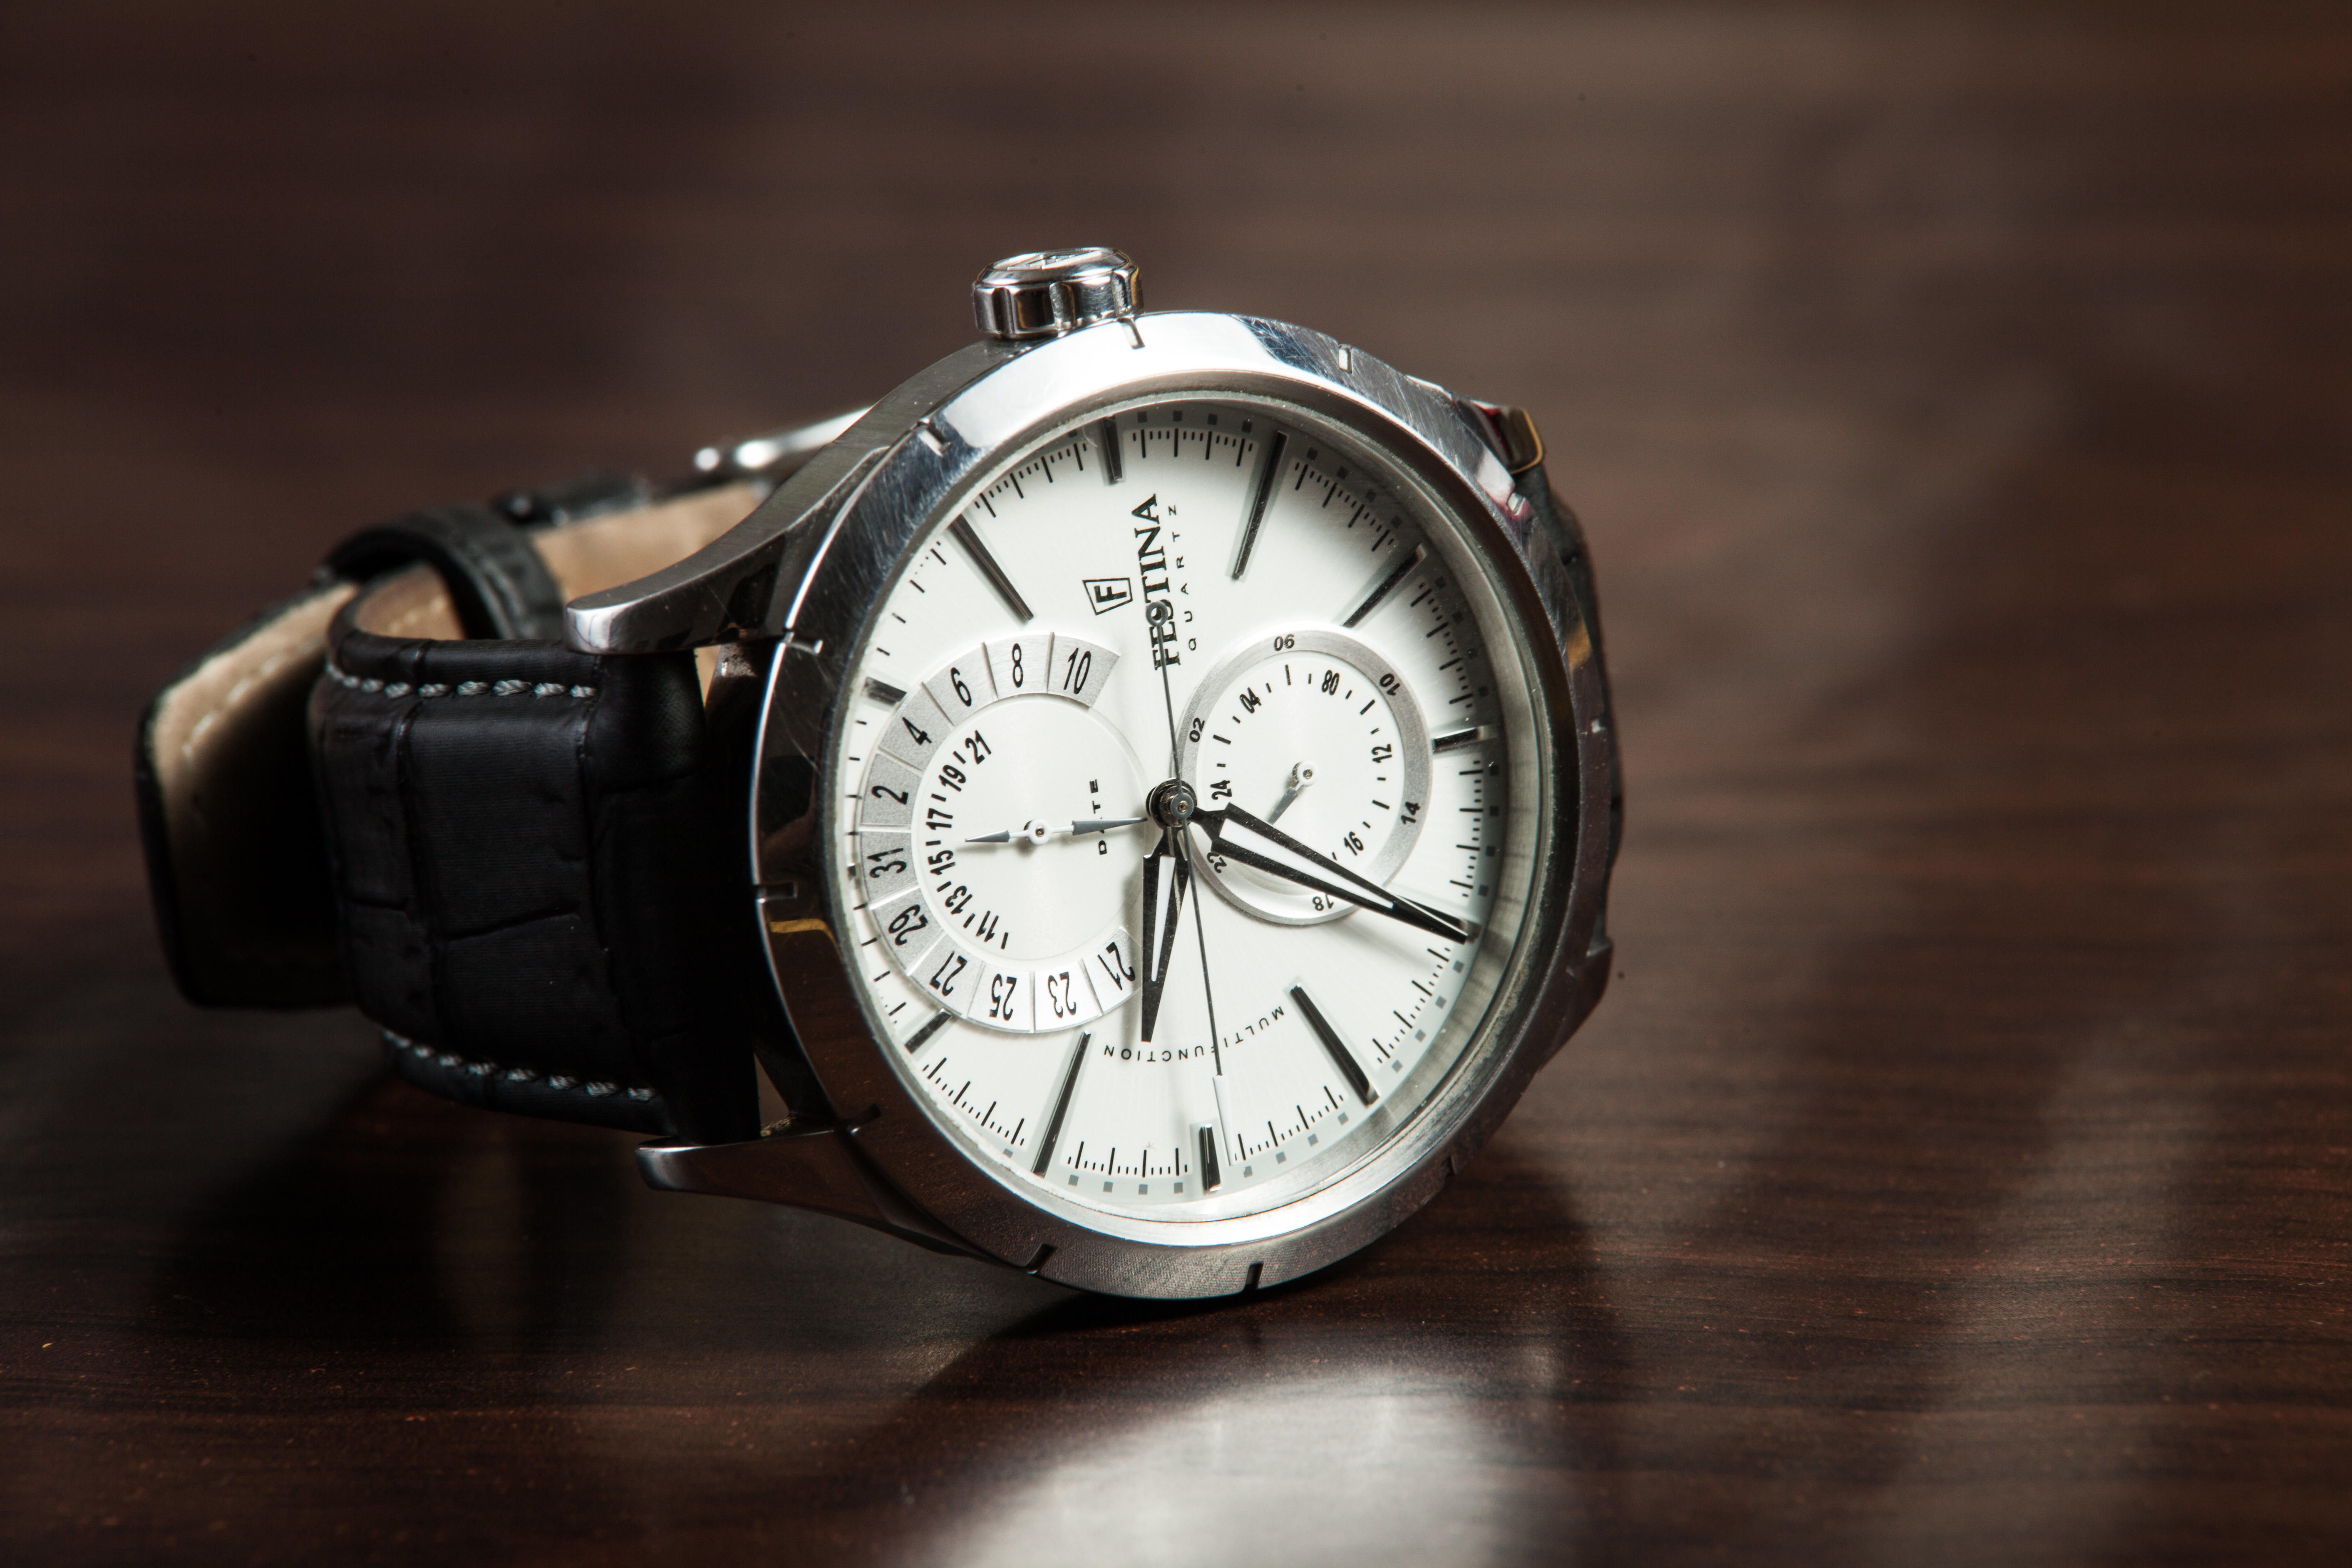 Images of Watch | 5616x3744